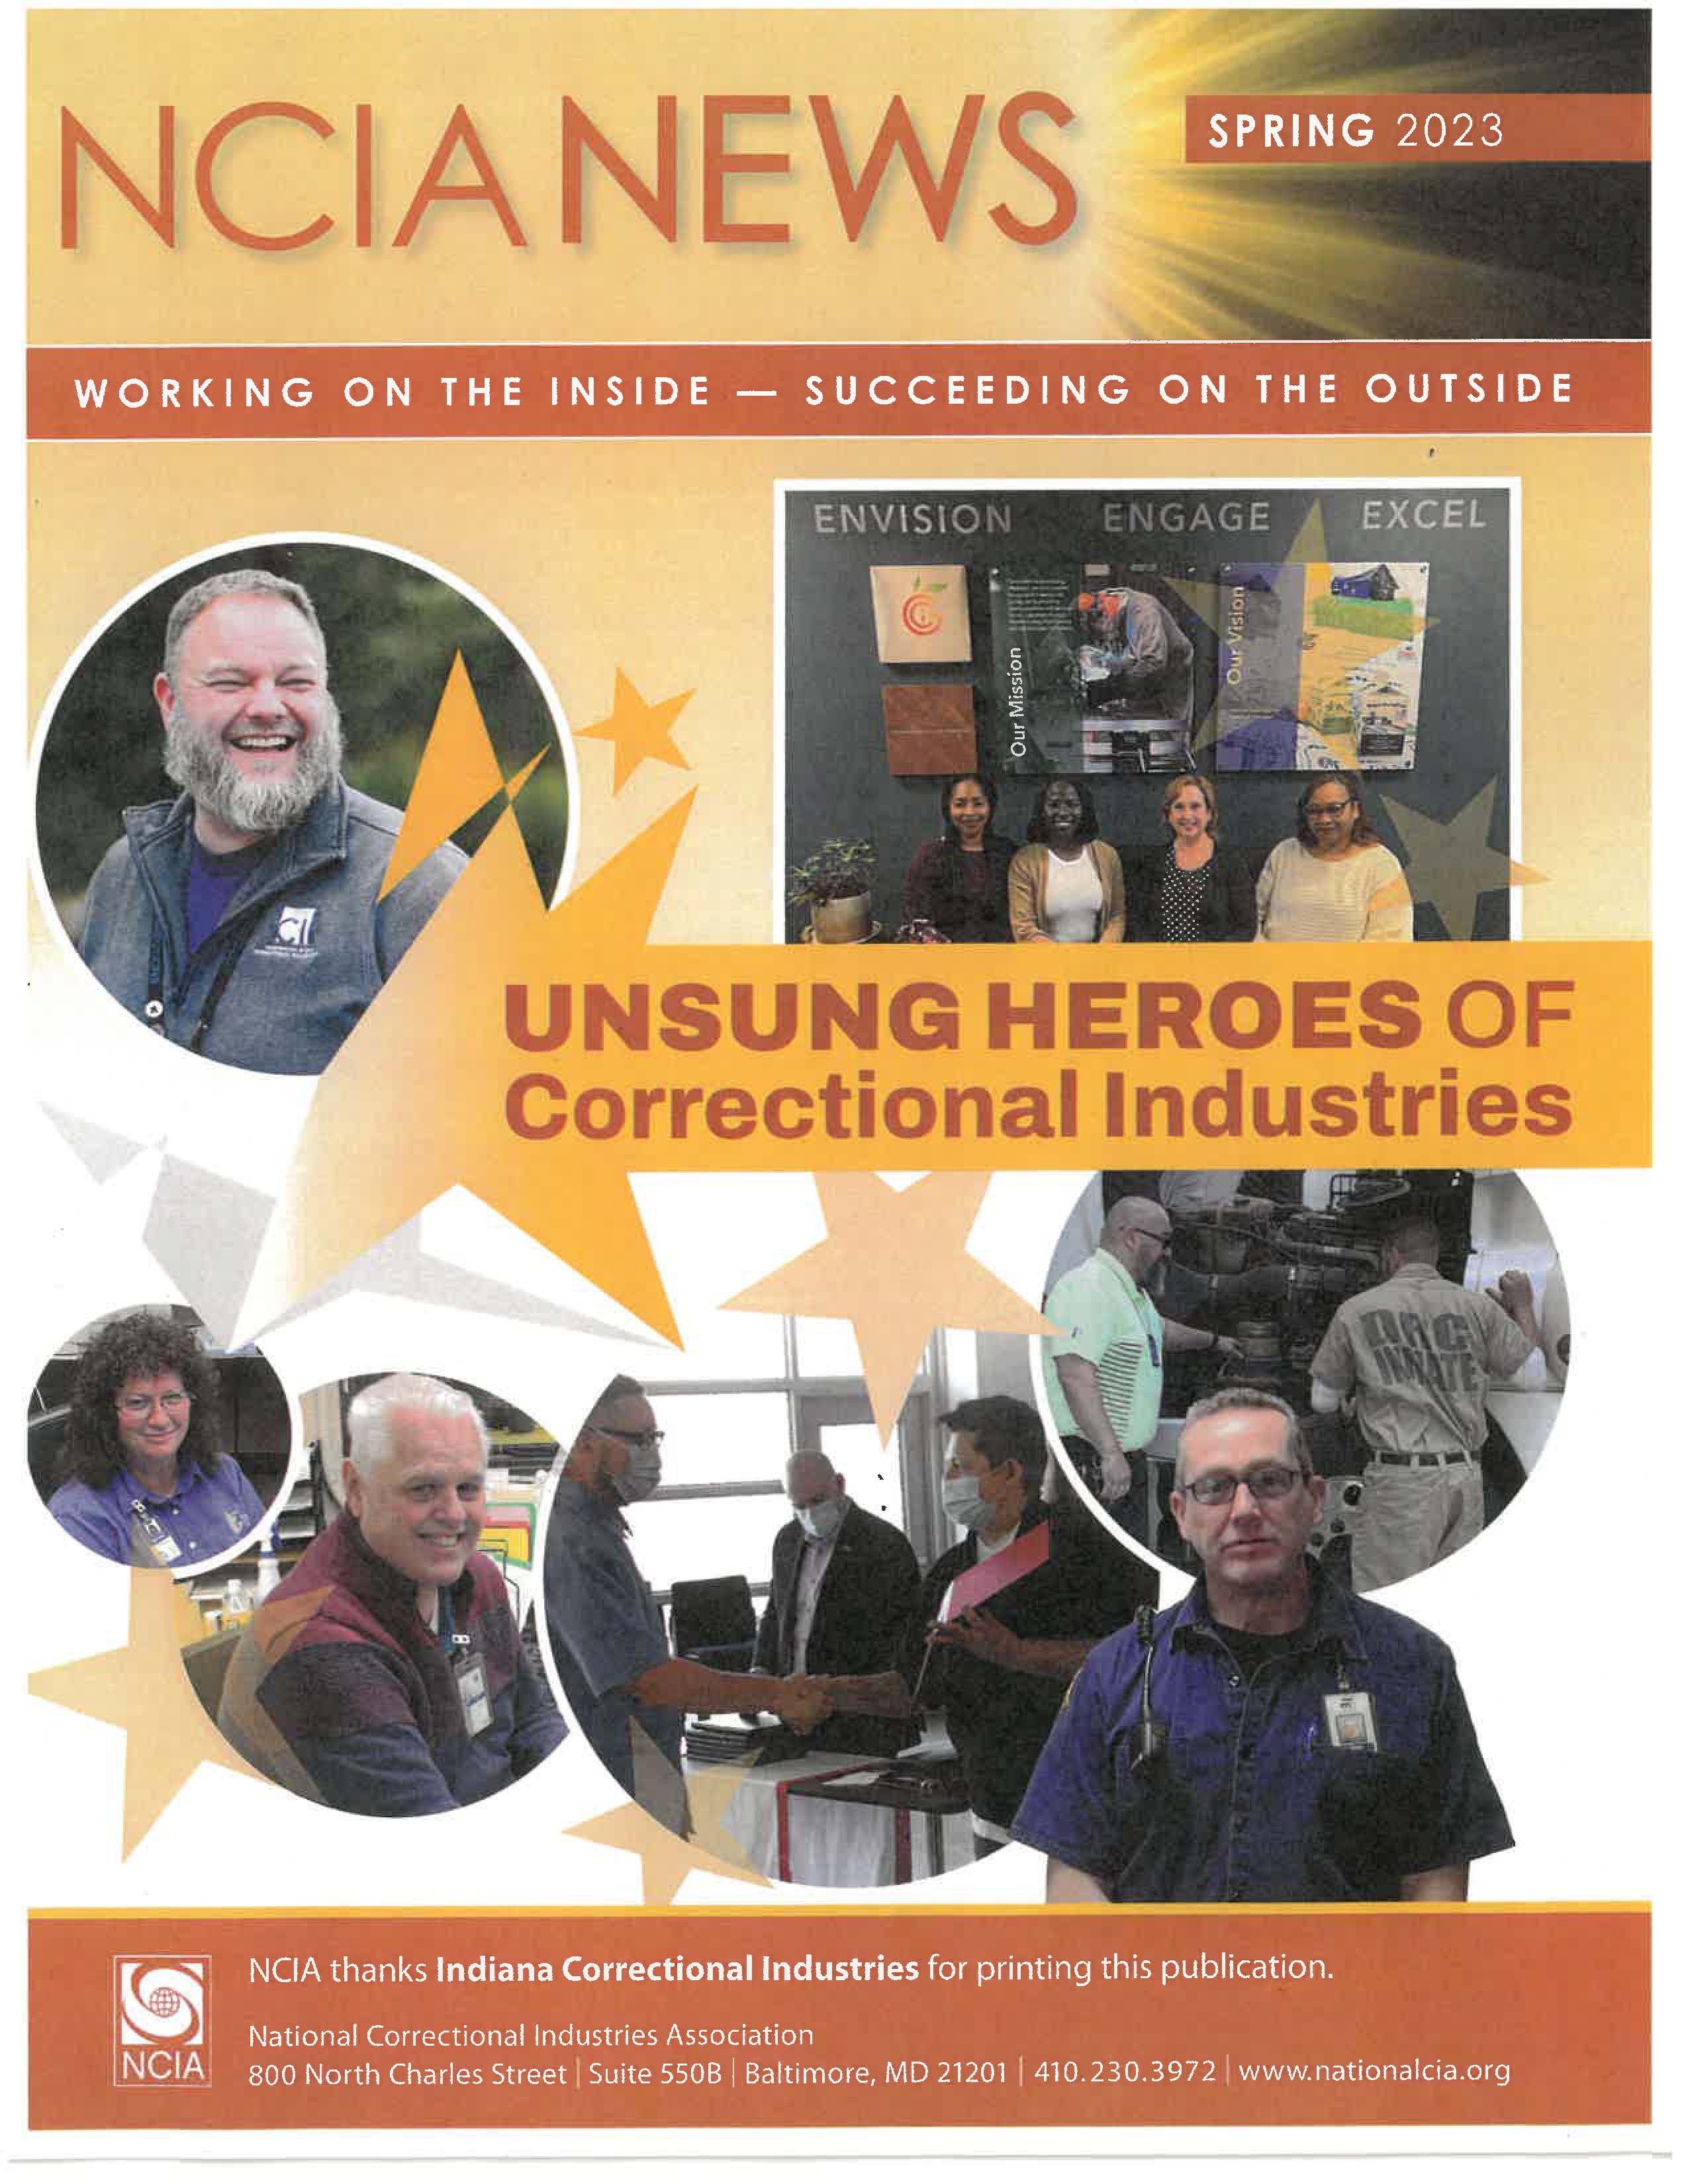 The cover of the NCIA News spring edition